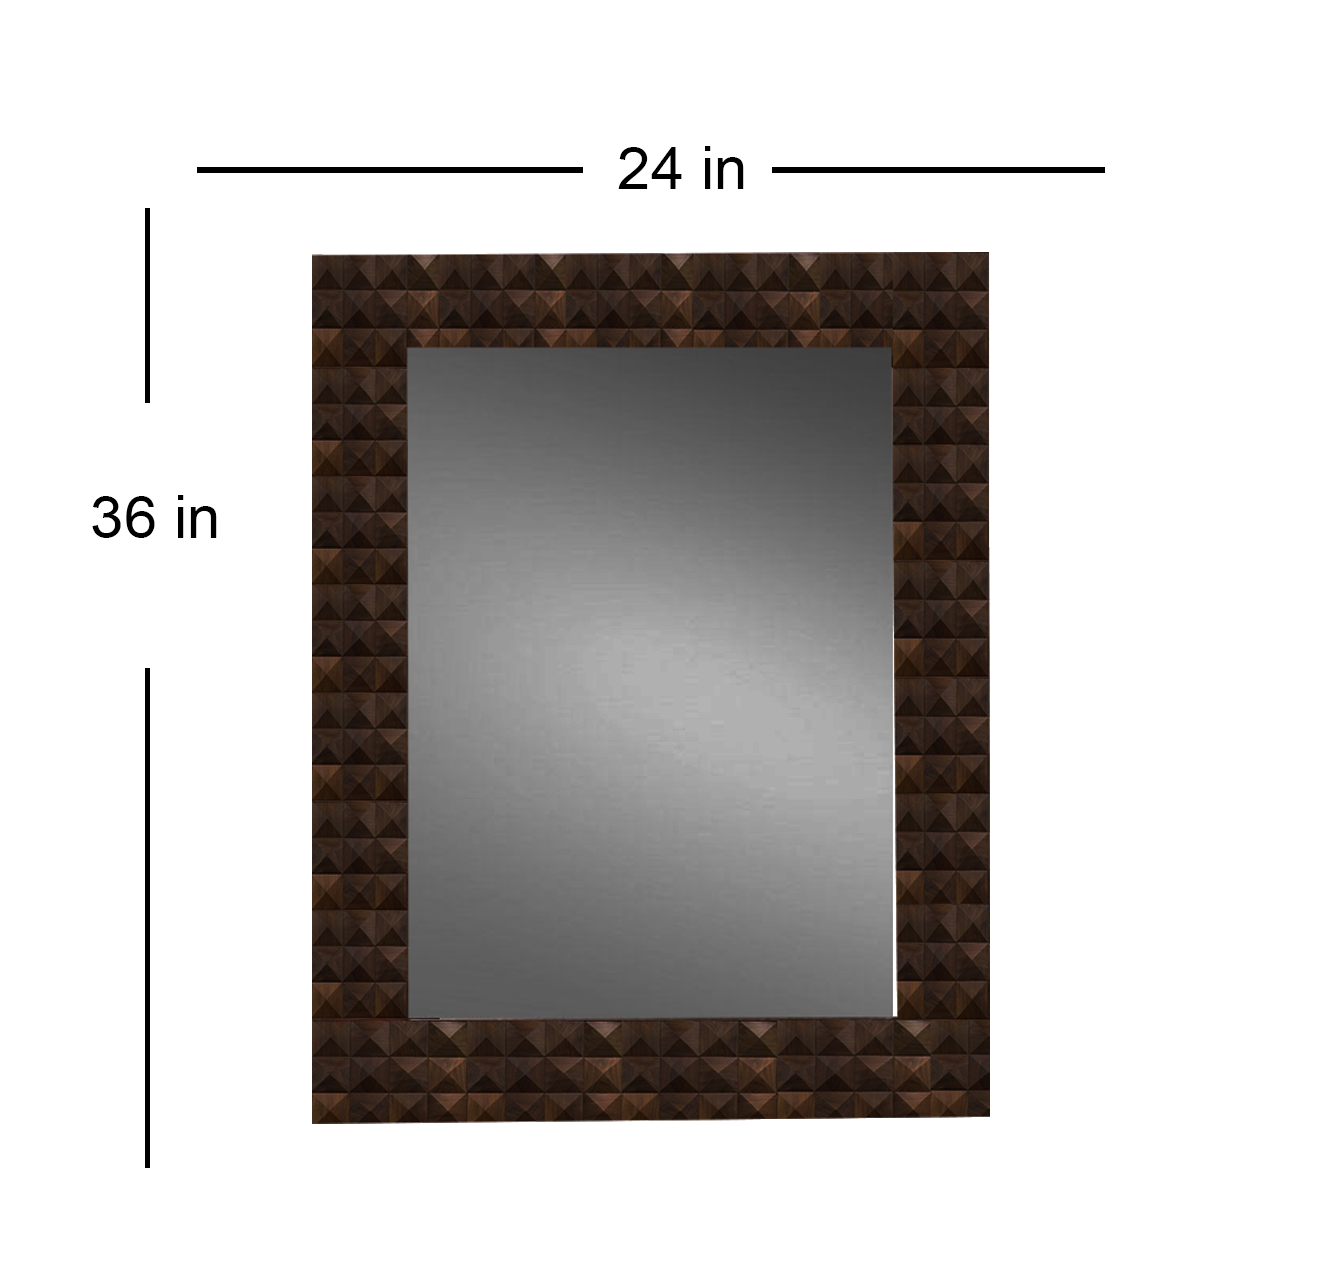 Detec™ Dark Brown Solid Wood Hand Carved Wall Mirror36 inche